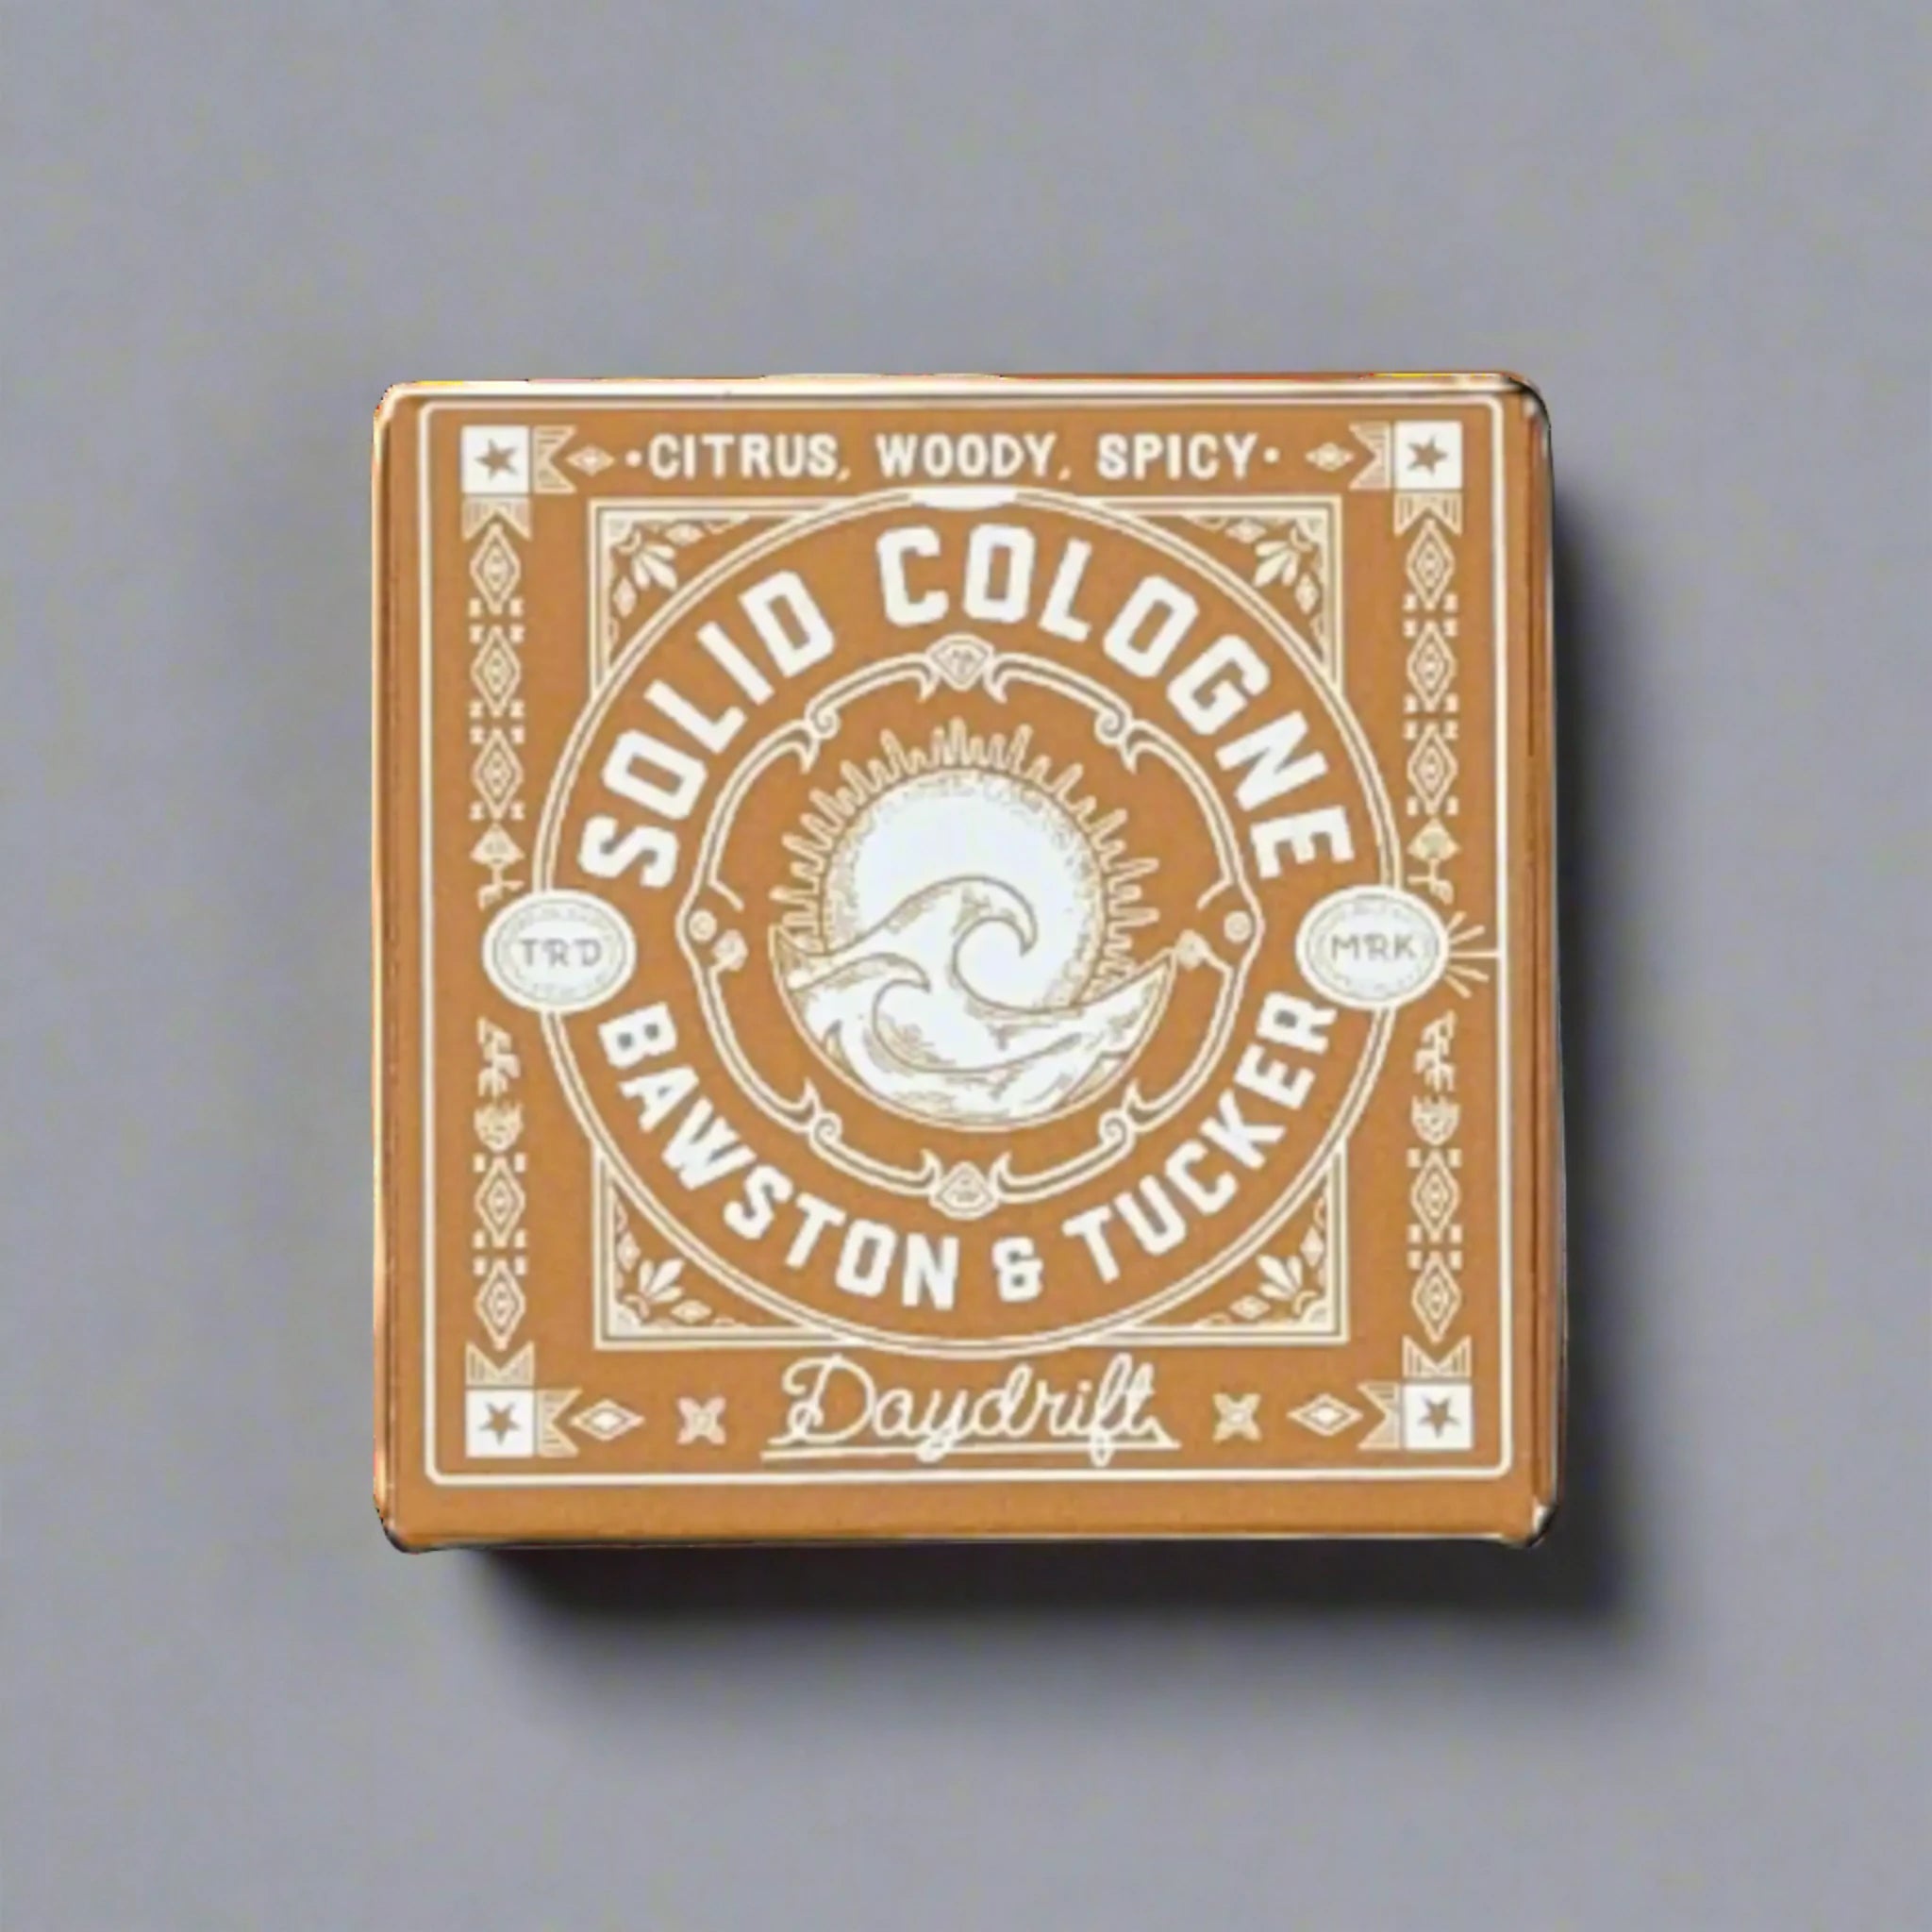 Daydrift - 1/2 OZ Solid Cologne